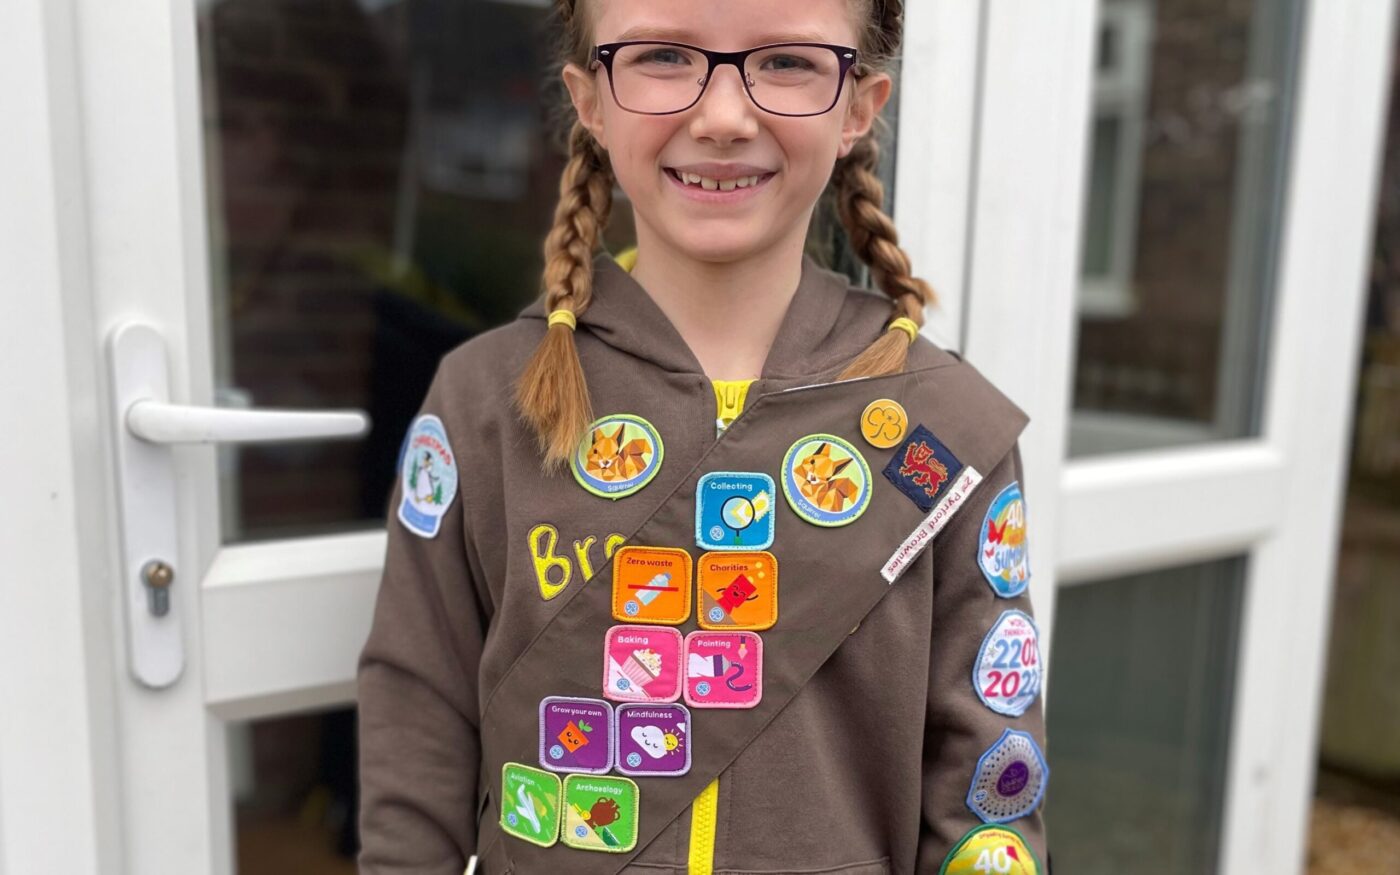 Brownie Emma with badges